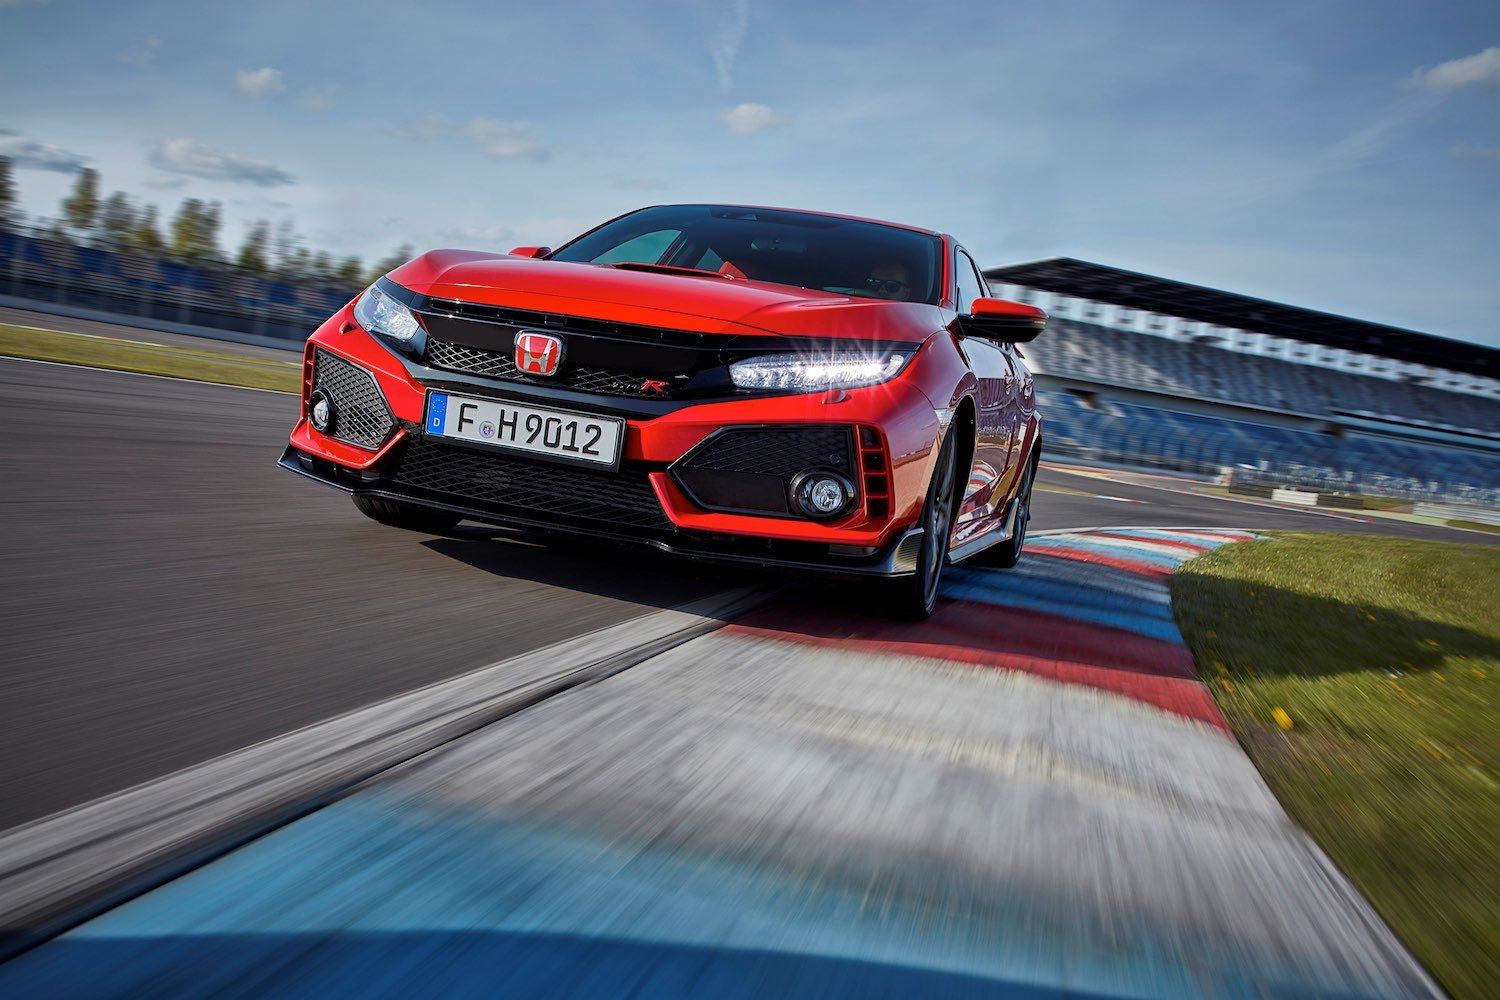 Tim Barnes-Clay reviews the 2018 Honda Civic Type R at the first drives 14